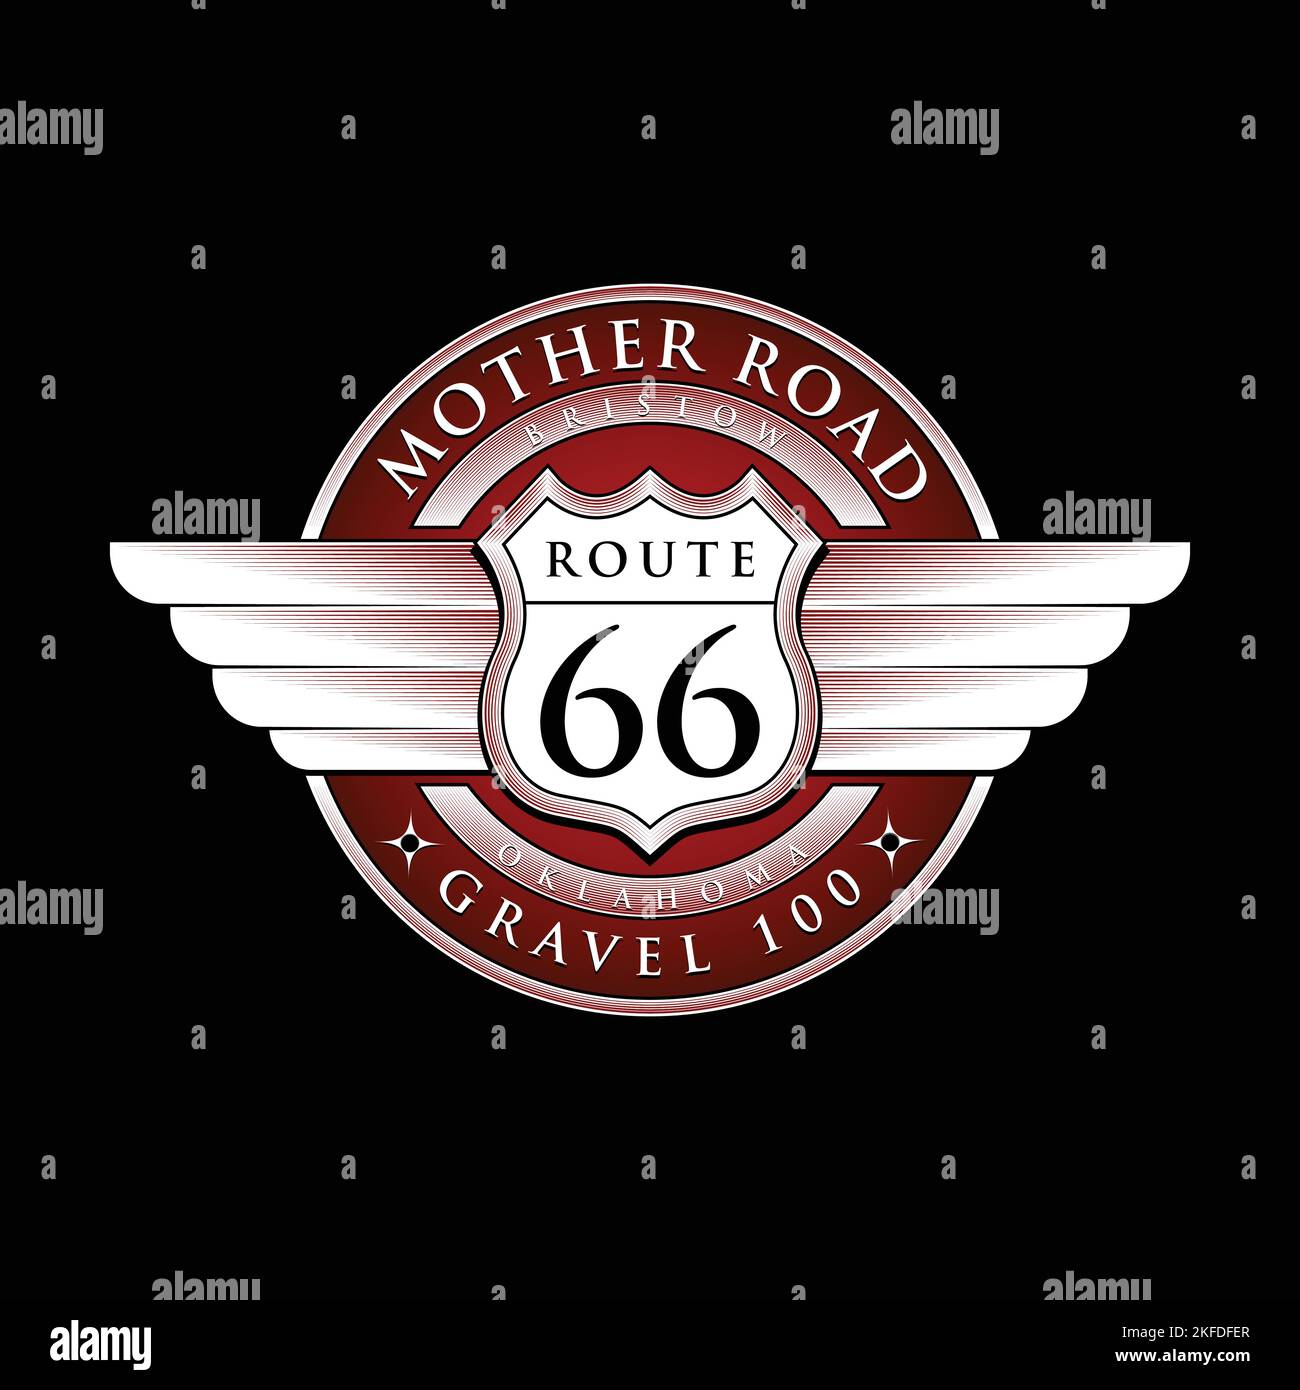 Route 66 Oklahoma Mother Road Stock Vector